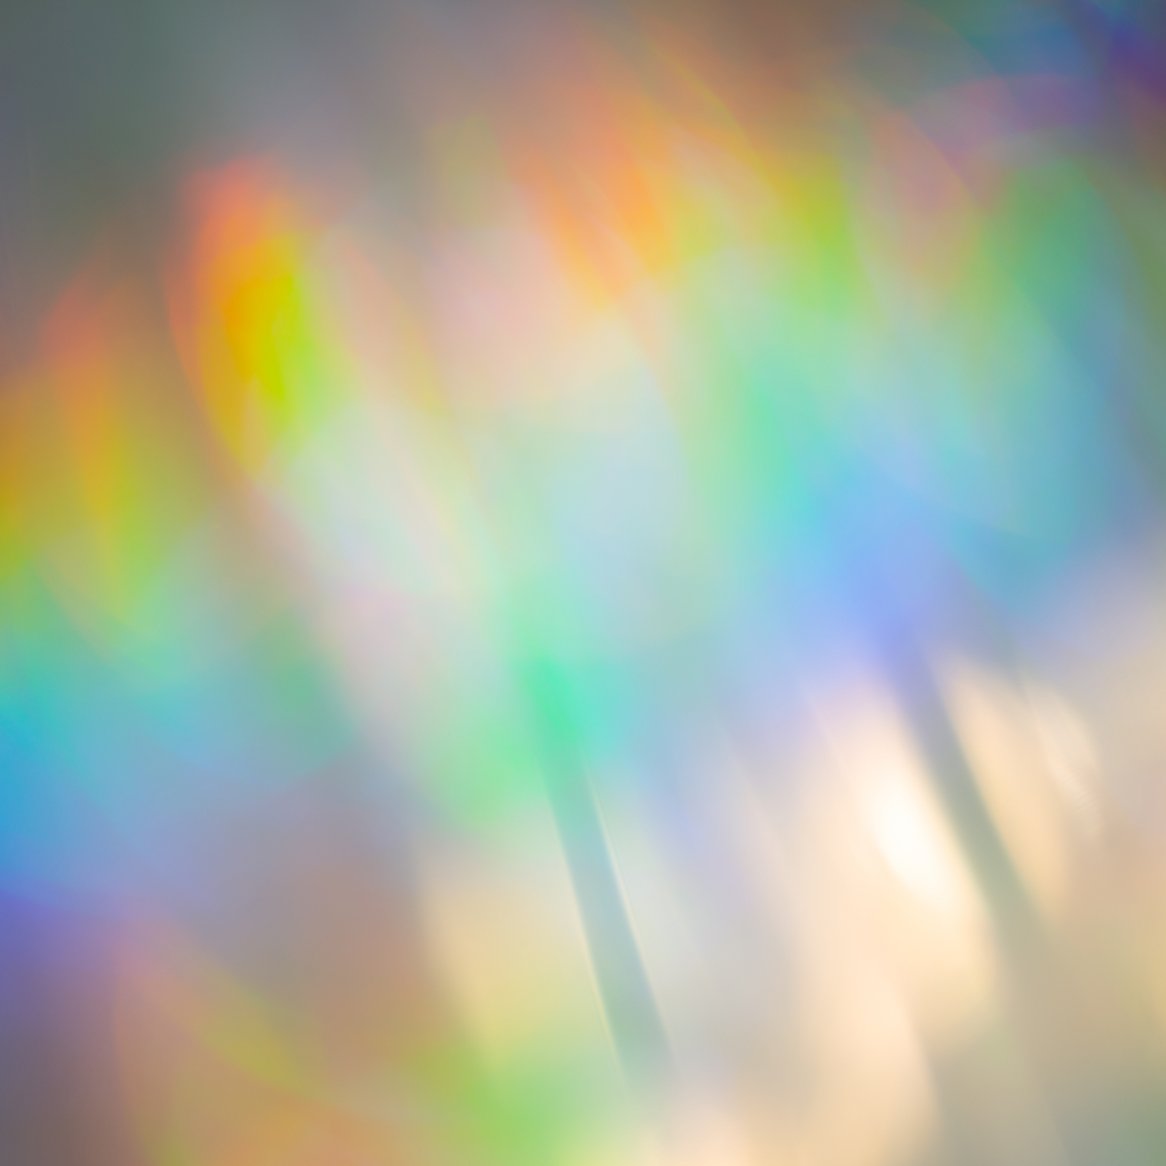 Image showing light refracted by a prism